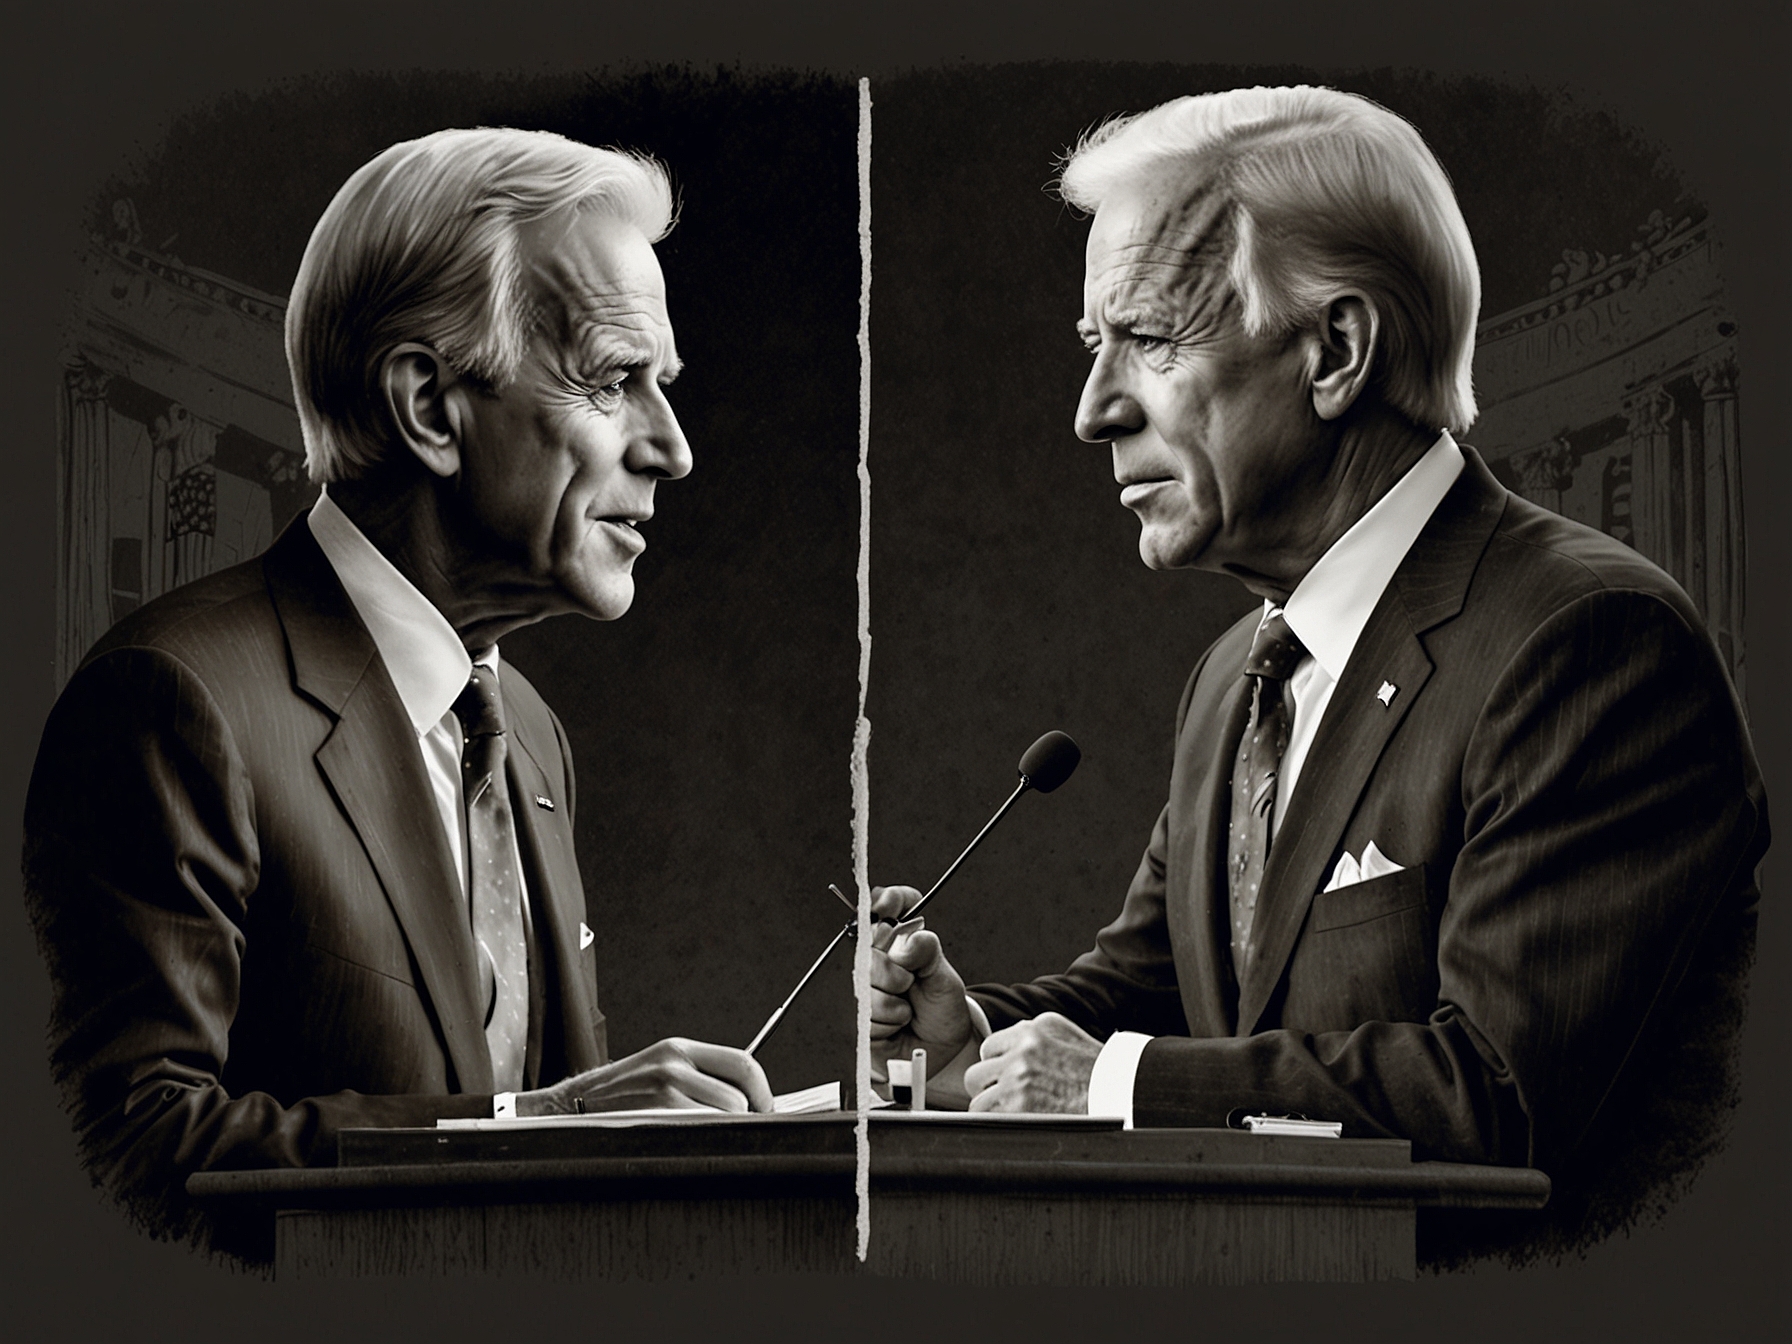 A split-screen illustration showing RFK Jr.'s live-streamed debate on one side and the Trump-Biden debate on the other, highlighting the concurrent timing and alternative viewpoints.